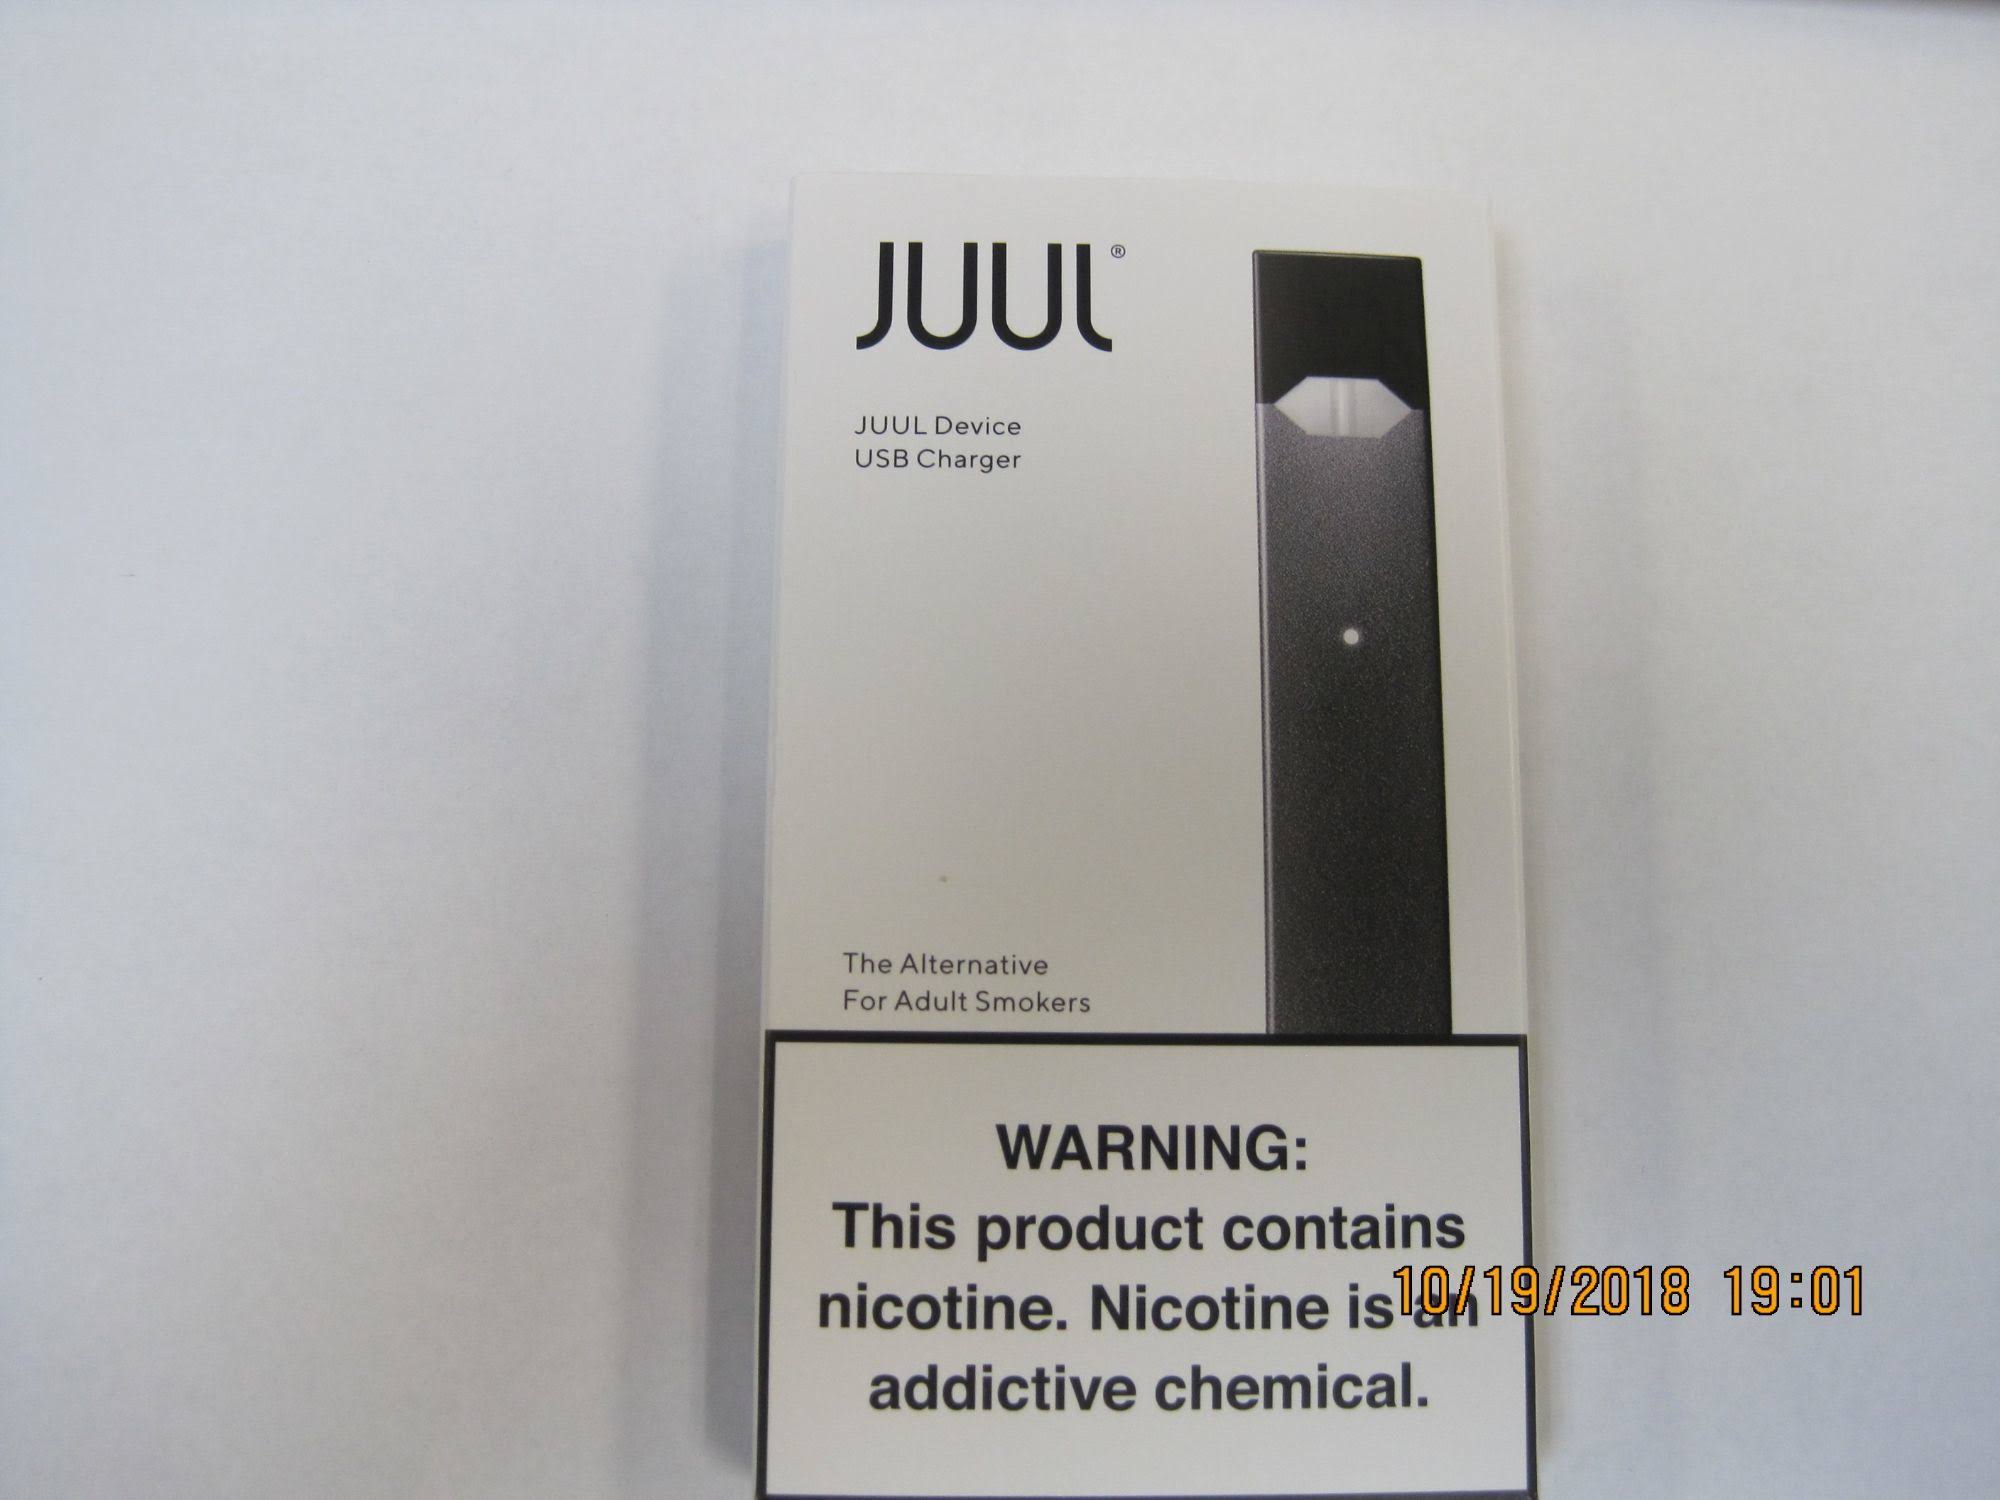 Juul Device with USB Charger Slate Color Genuine 4035090